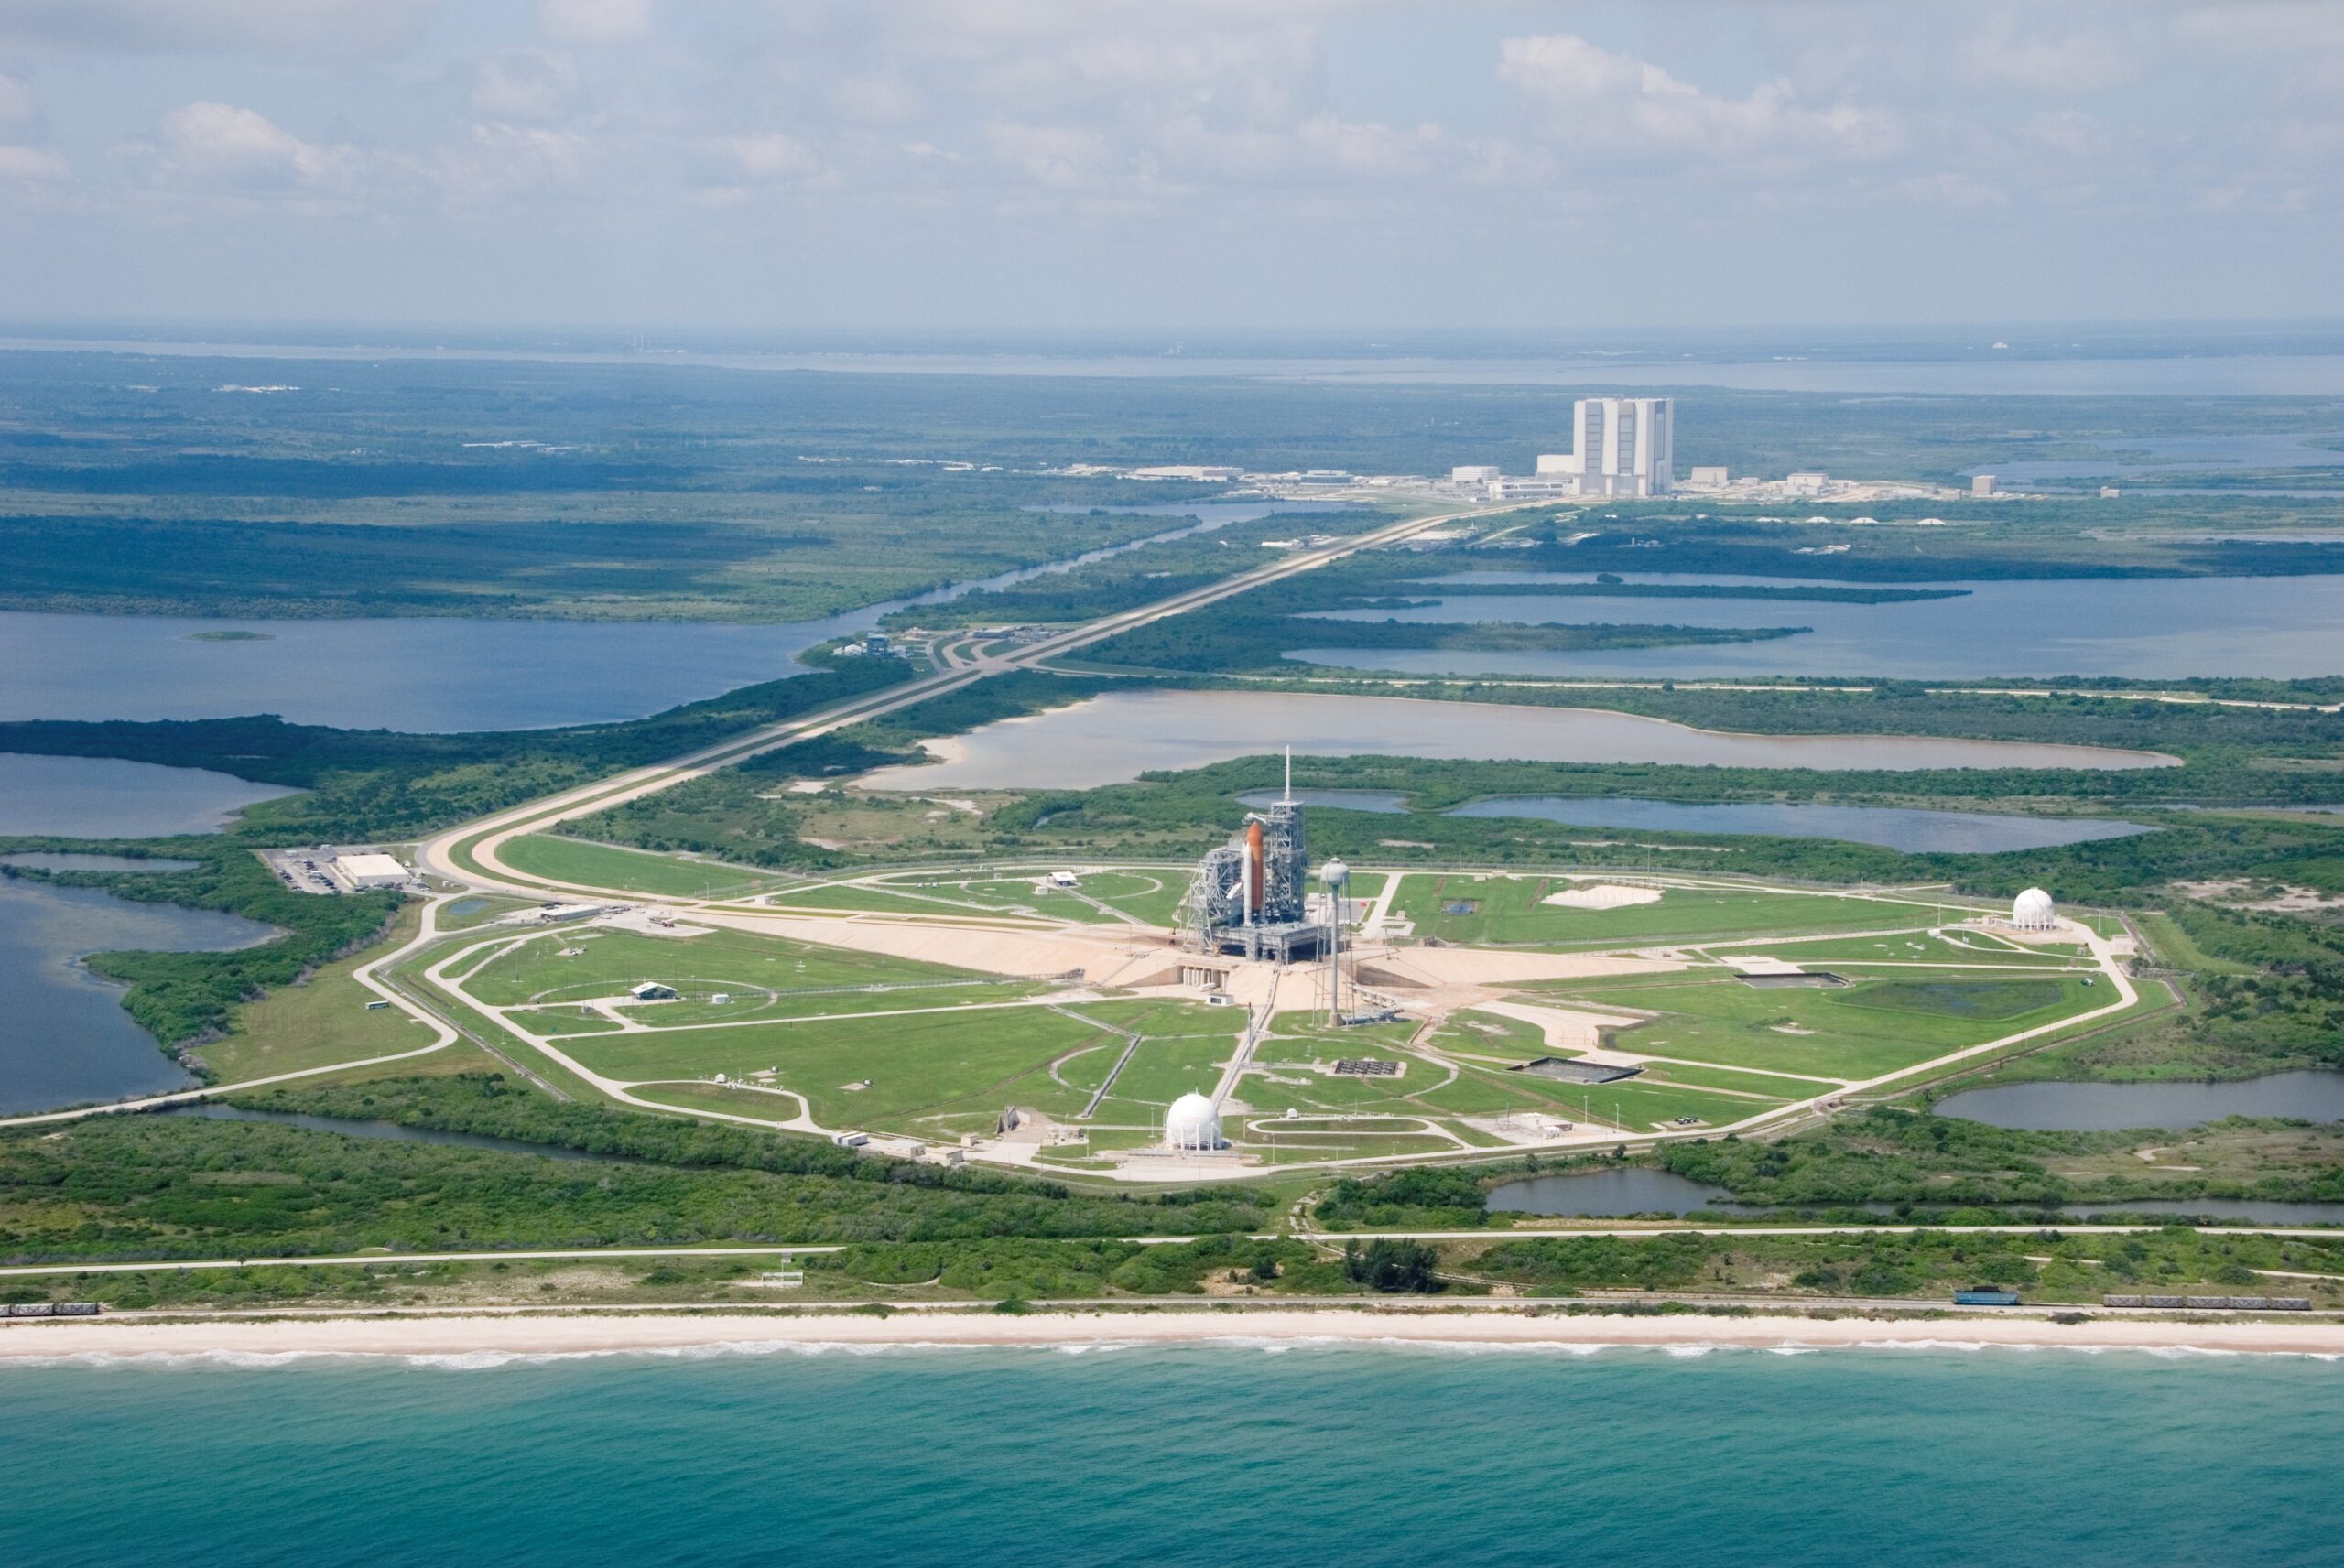 Cape Canaveral in Florida